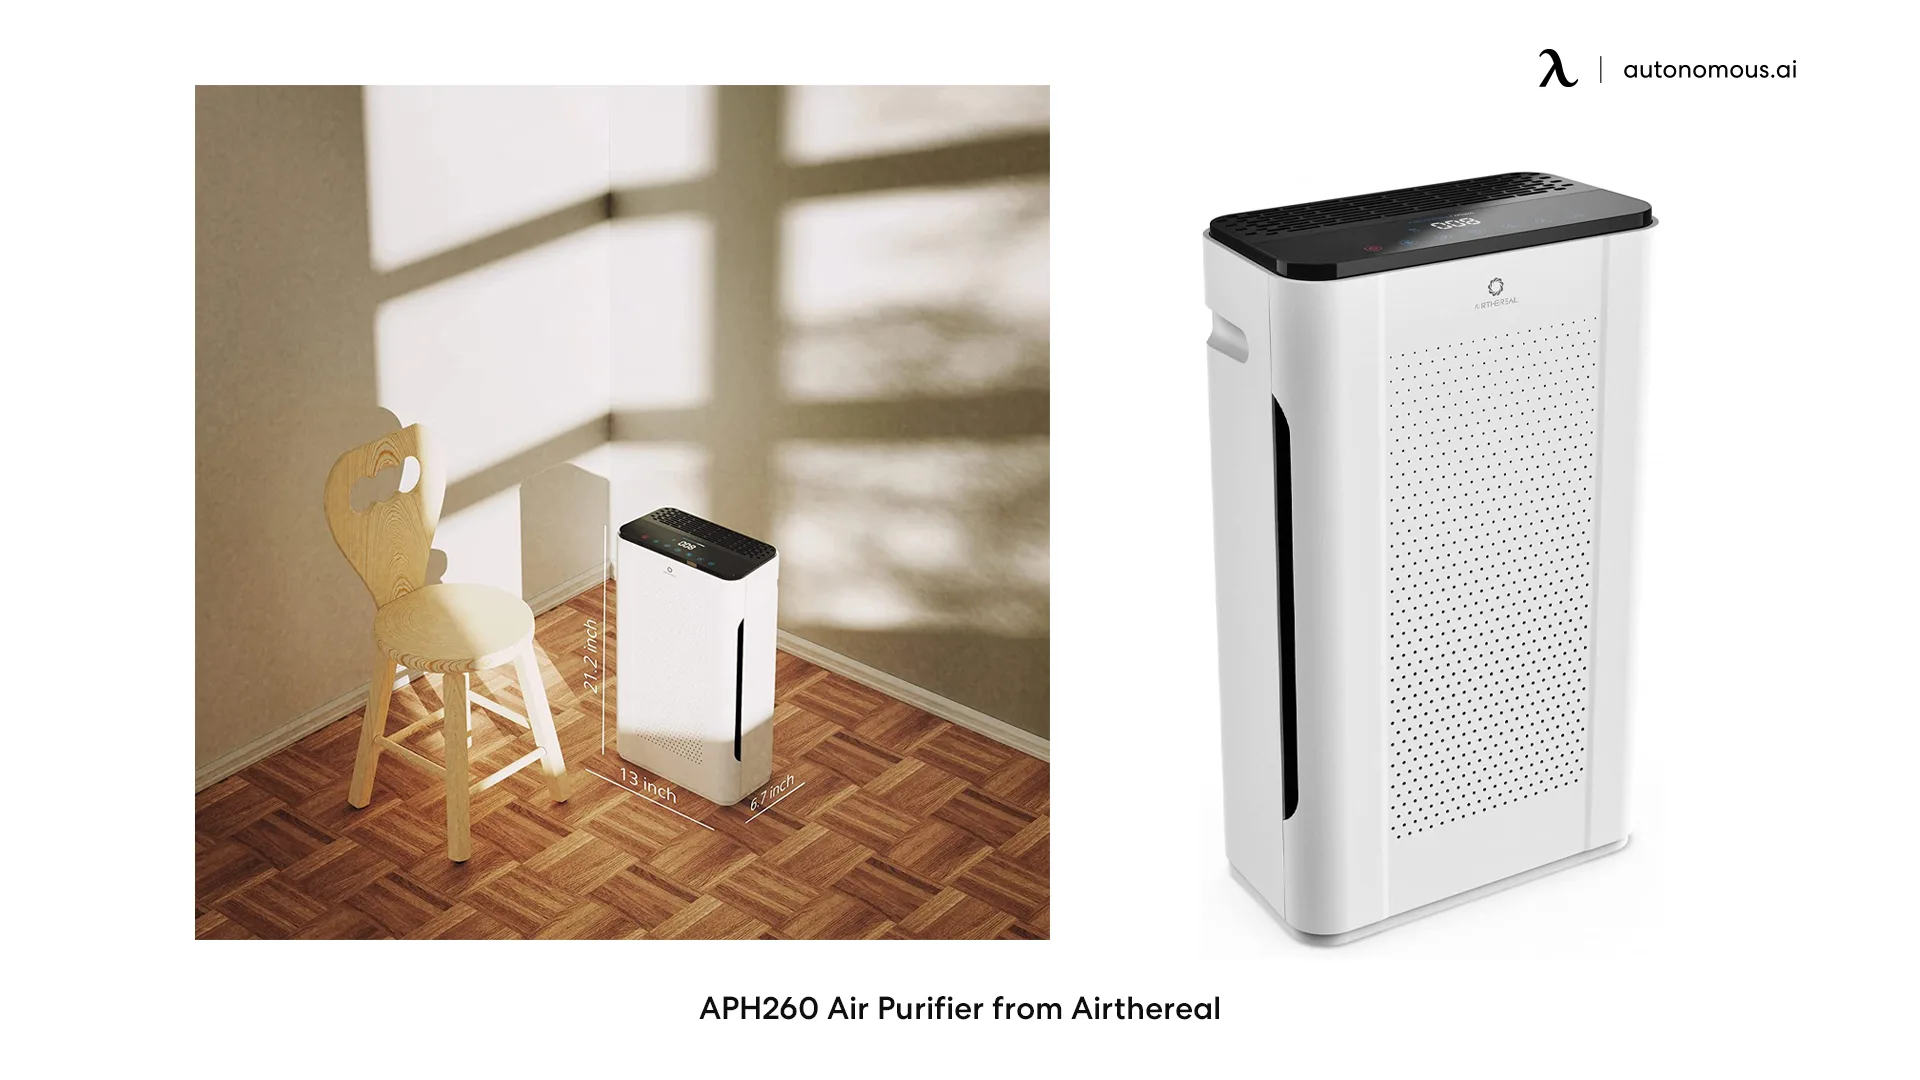 APH260 Air Purifier from Airthereal